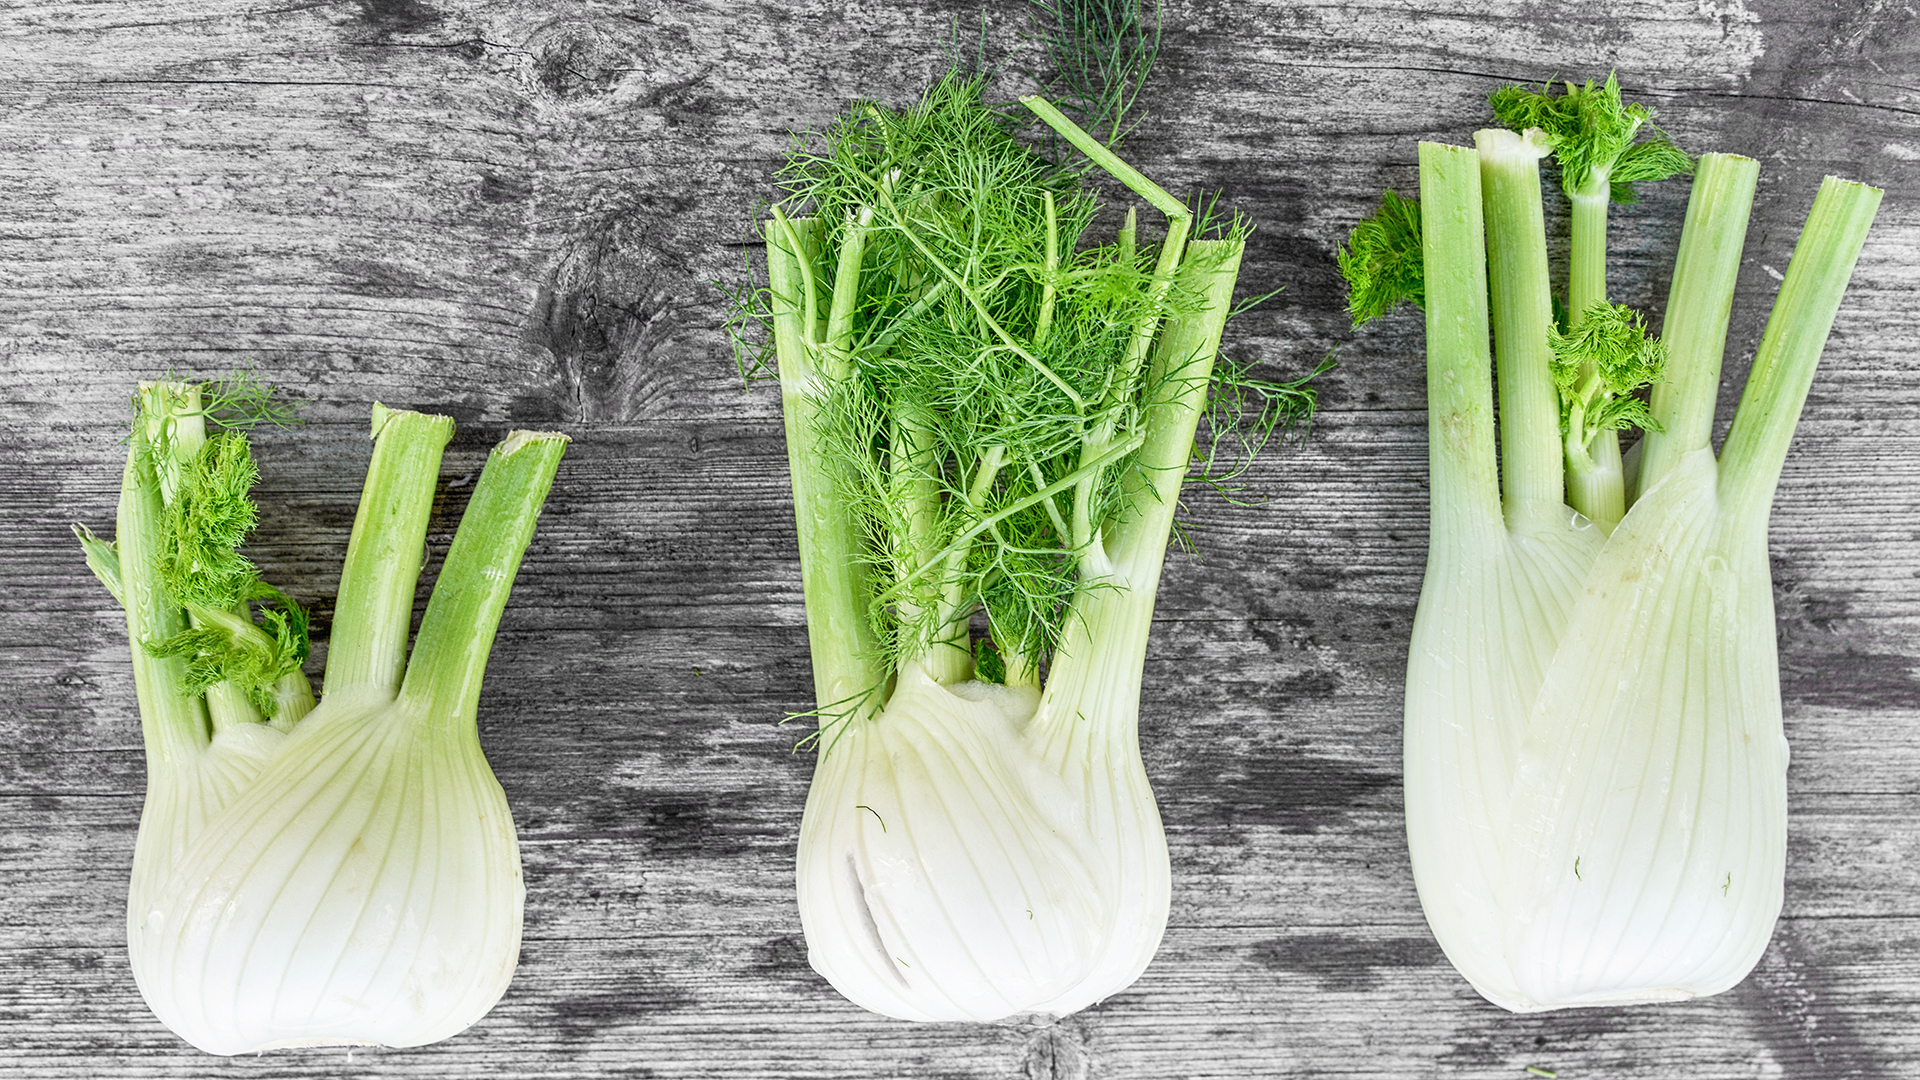 How to grow fennel – as a herb or vegetable